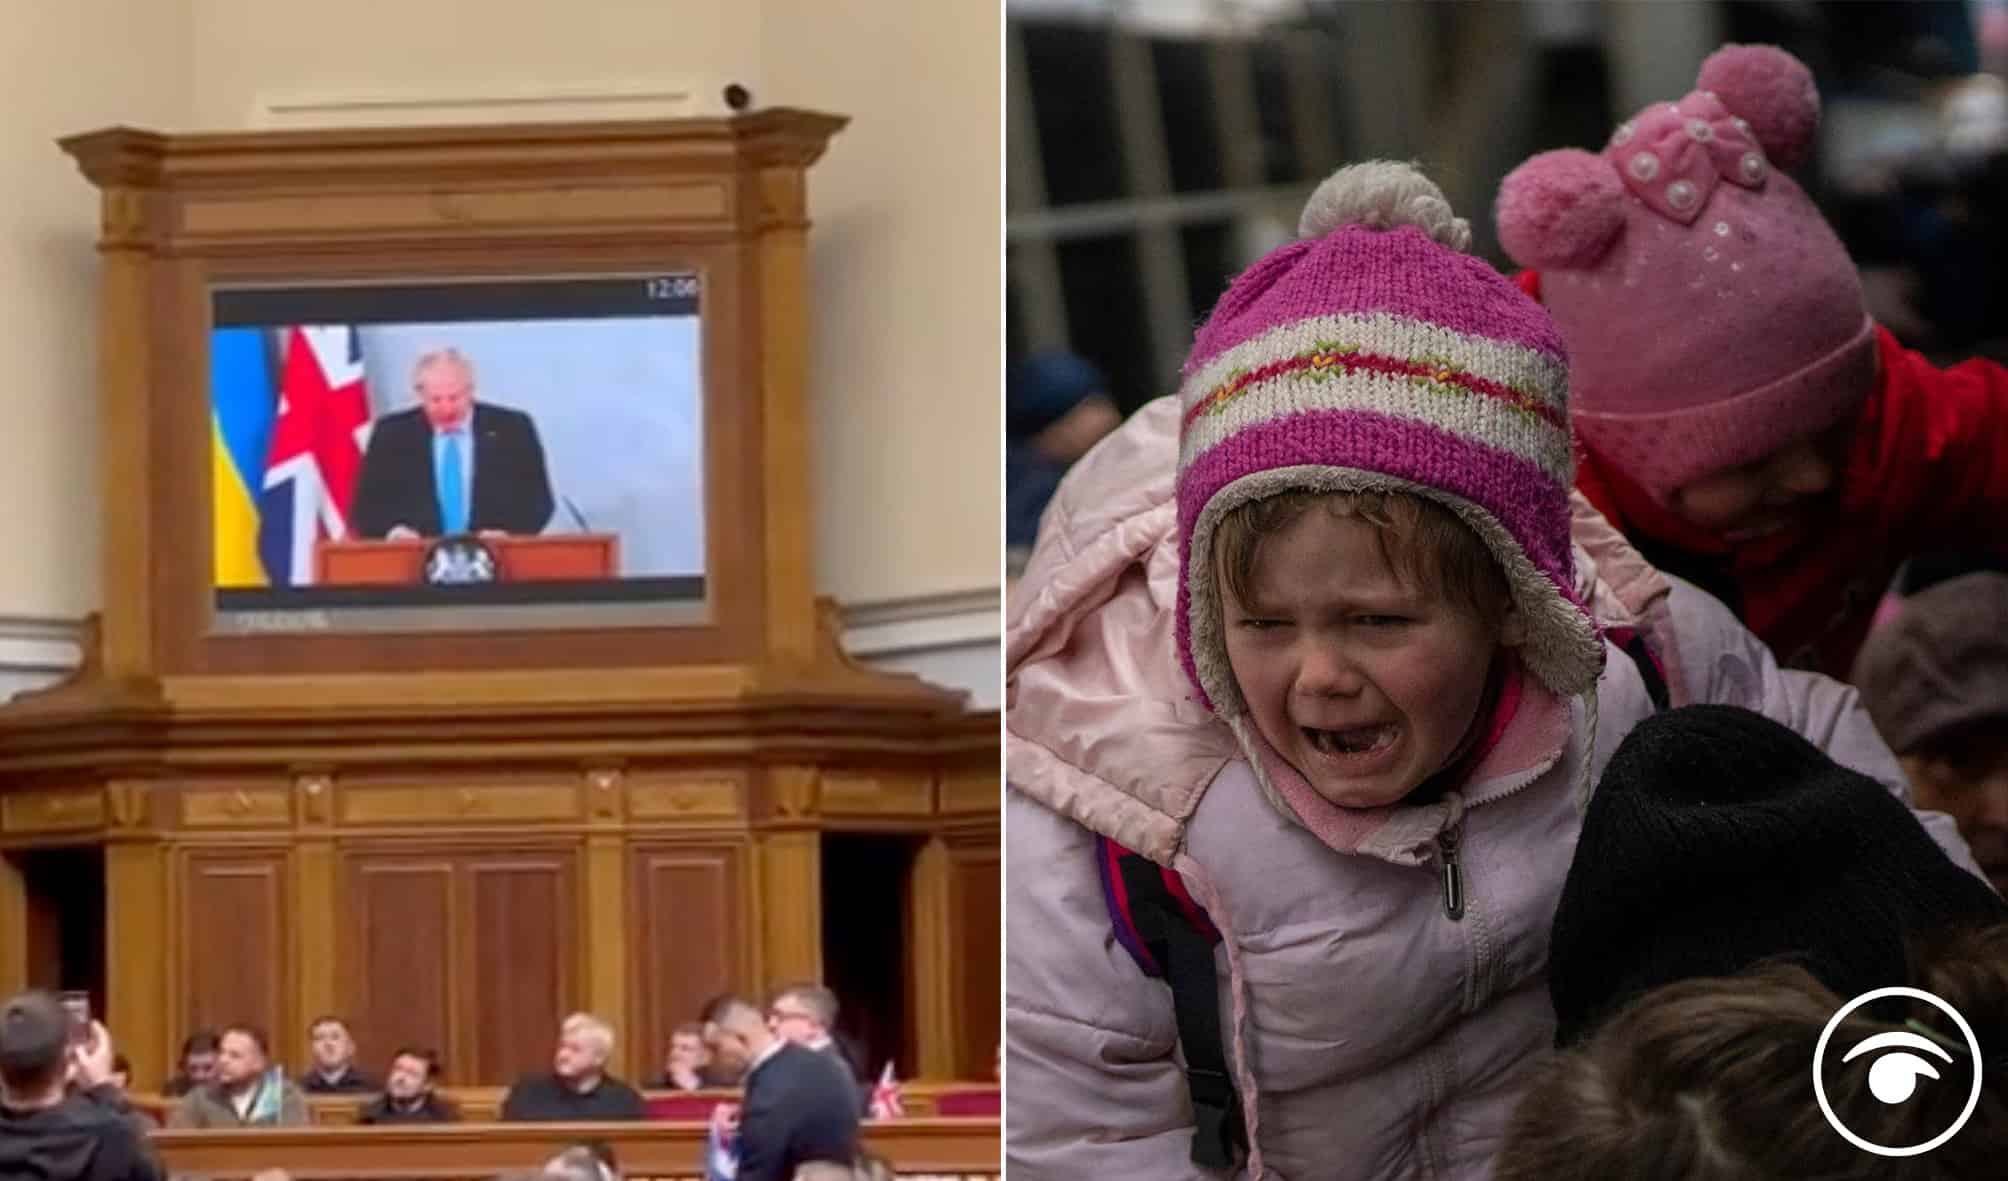 Ironic? PM makes speech to Ukraine’s parliament as govt faces legal action over refugee intake